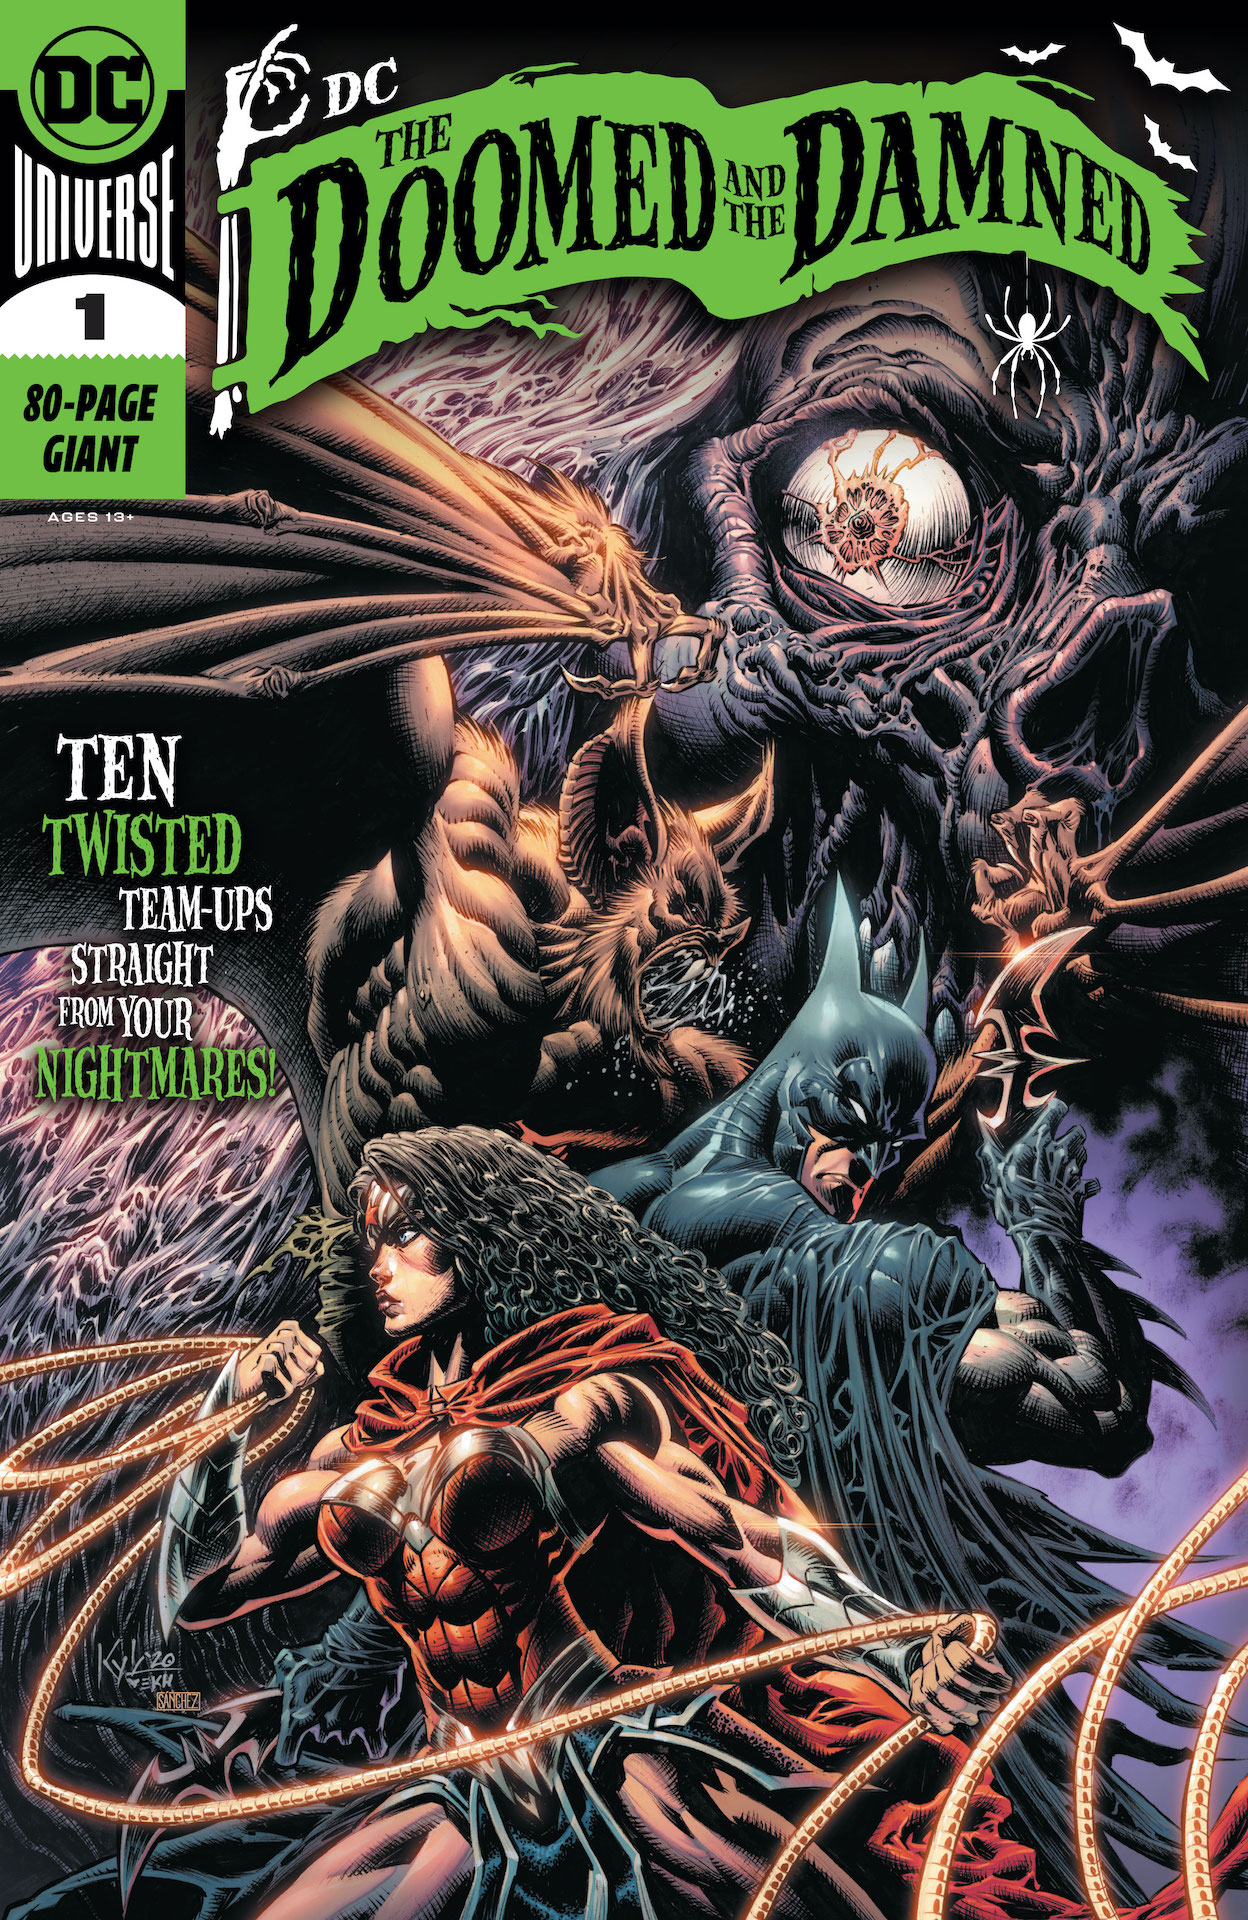 DC: The Doomed and the Damned #1 cover